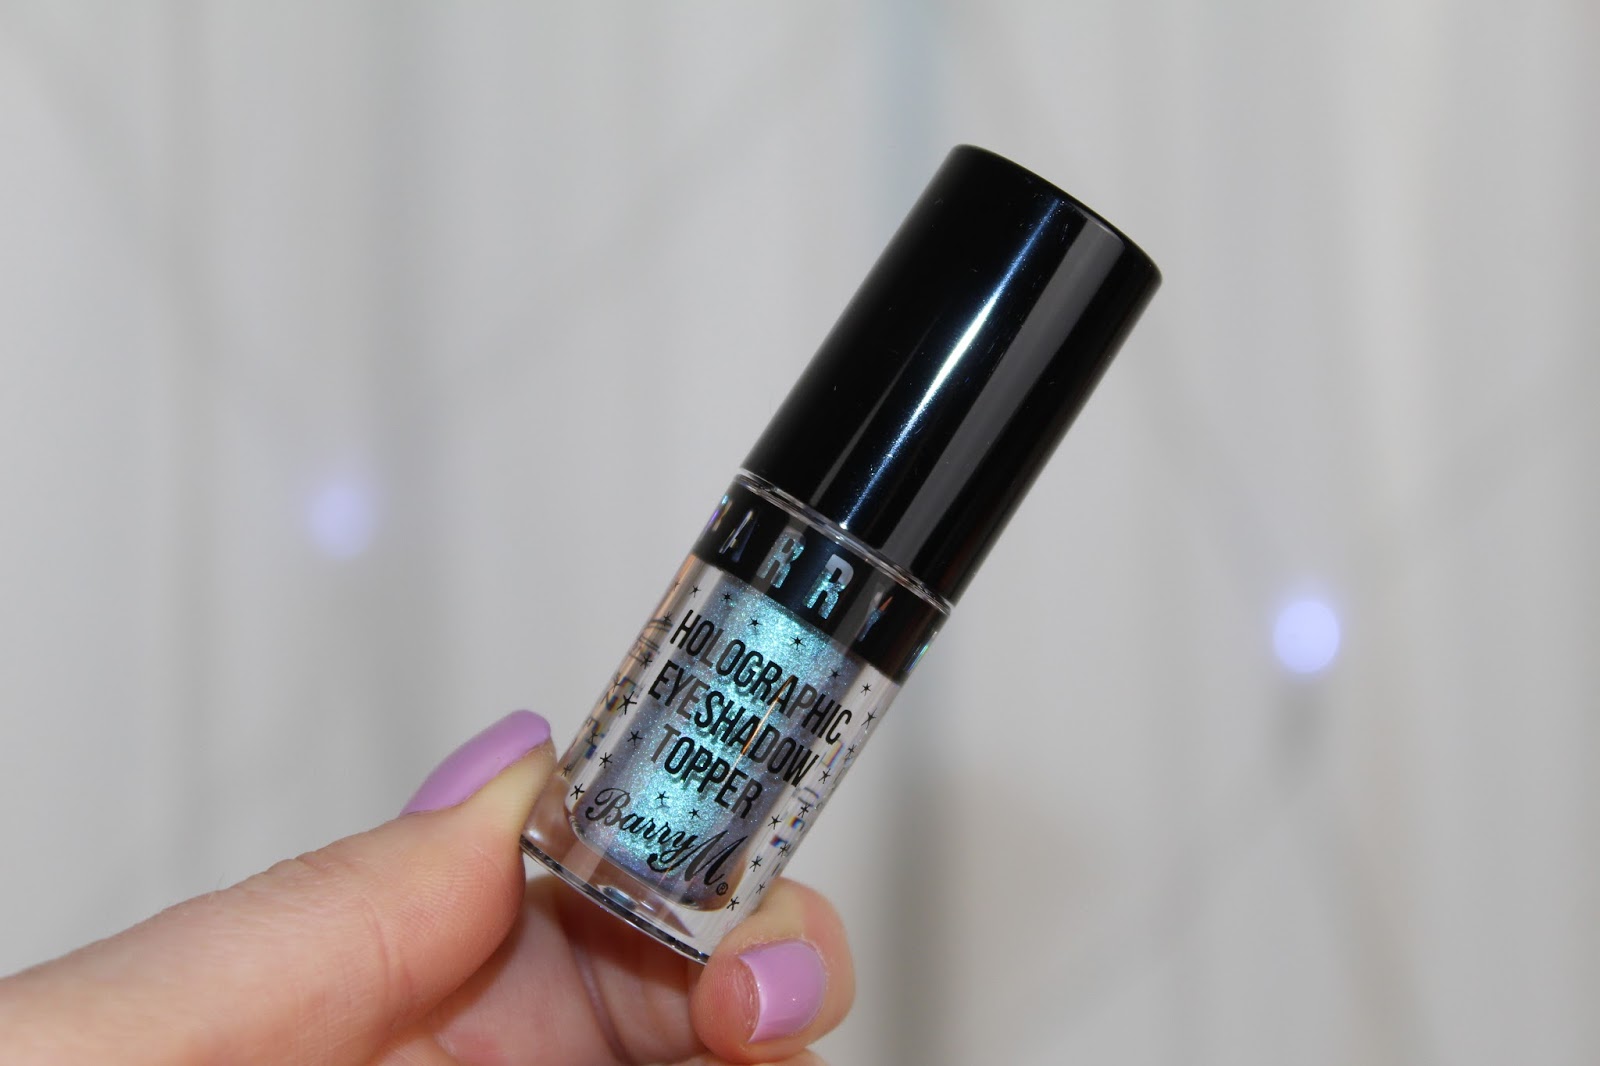 Window to The beauty: Barry M Holographic Eyeshadow Topper Review